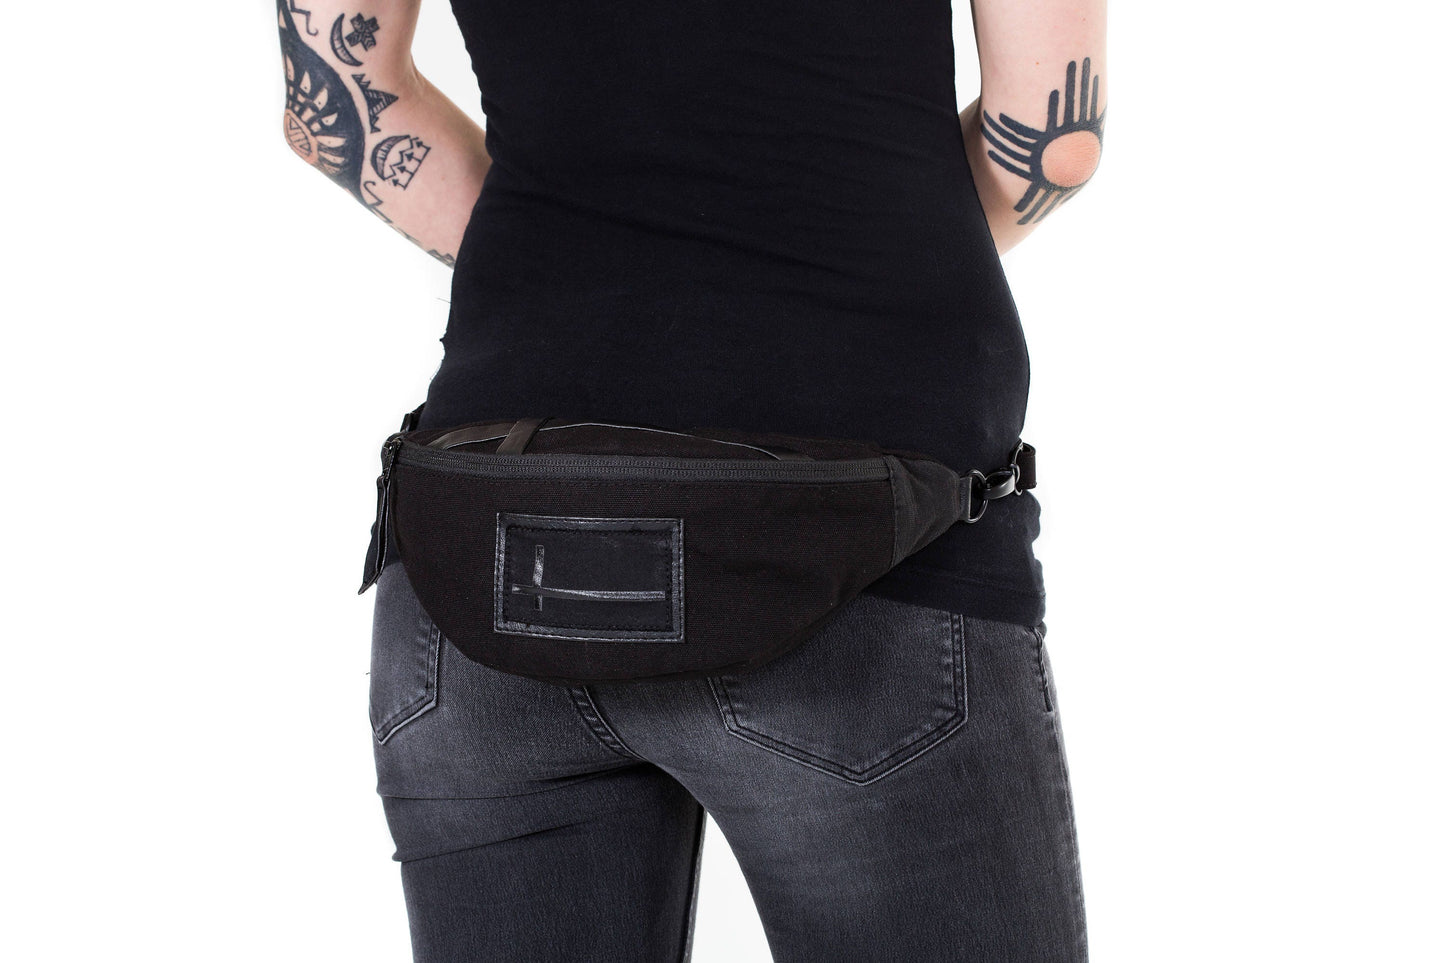 INTERSECTION AGENT Black Canvas Cross Body Mini Messenger Bag and Fanny Pack Passport Holder